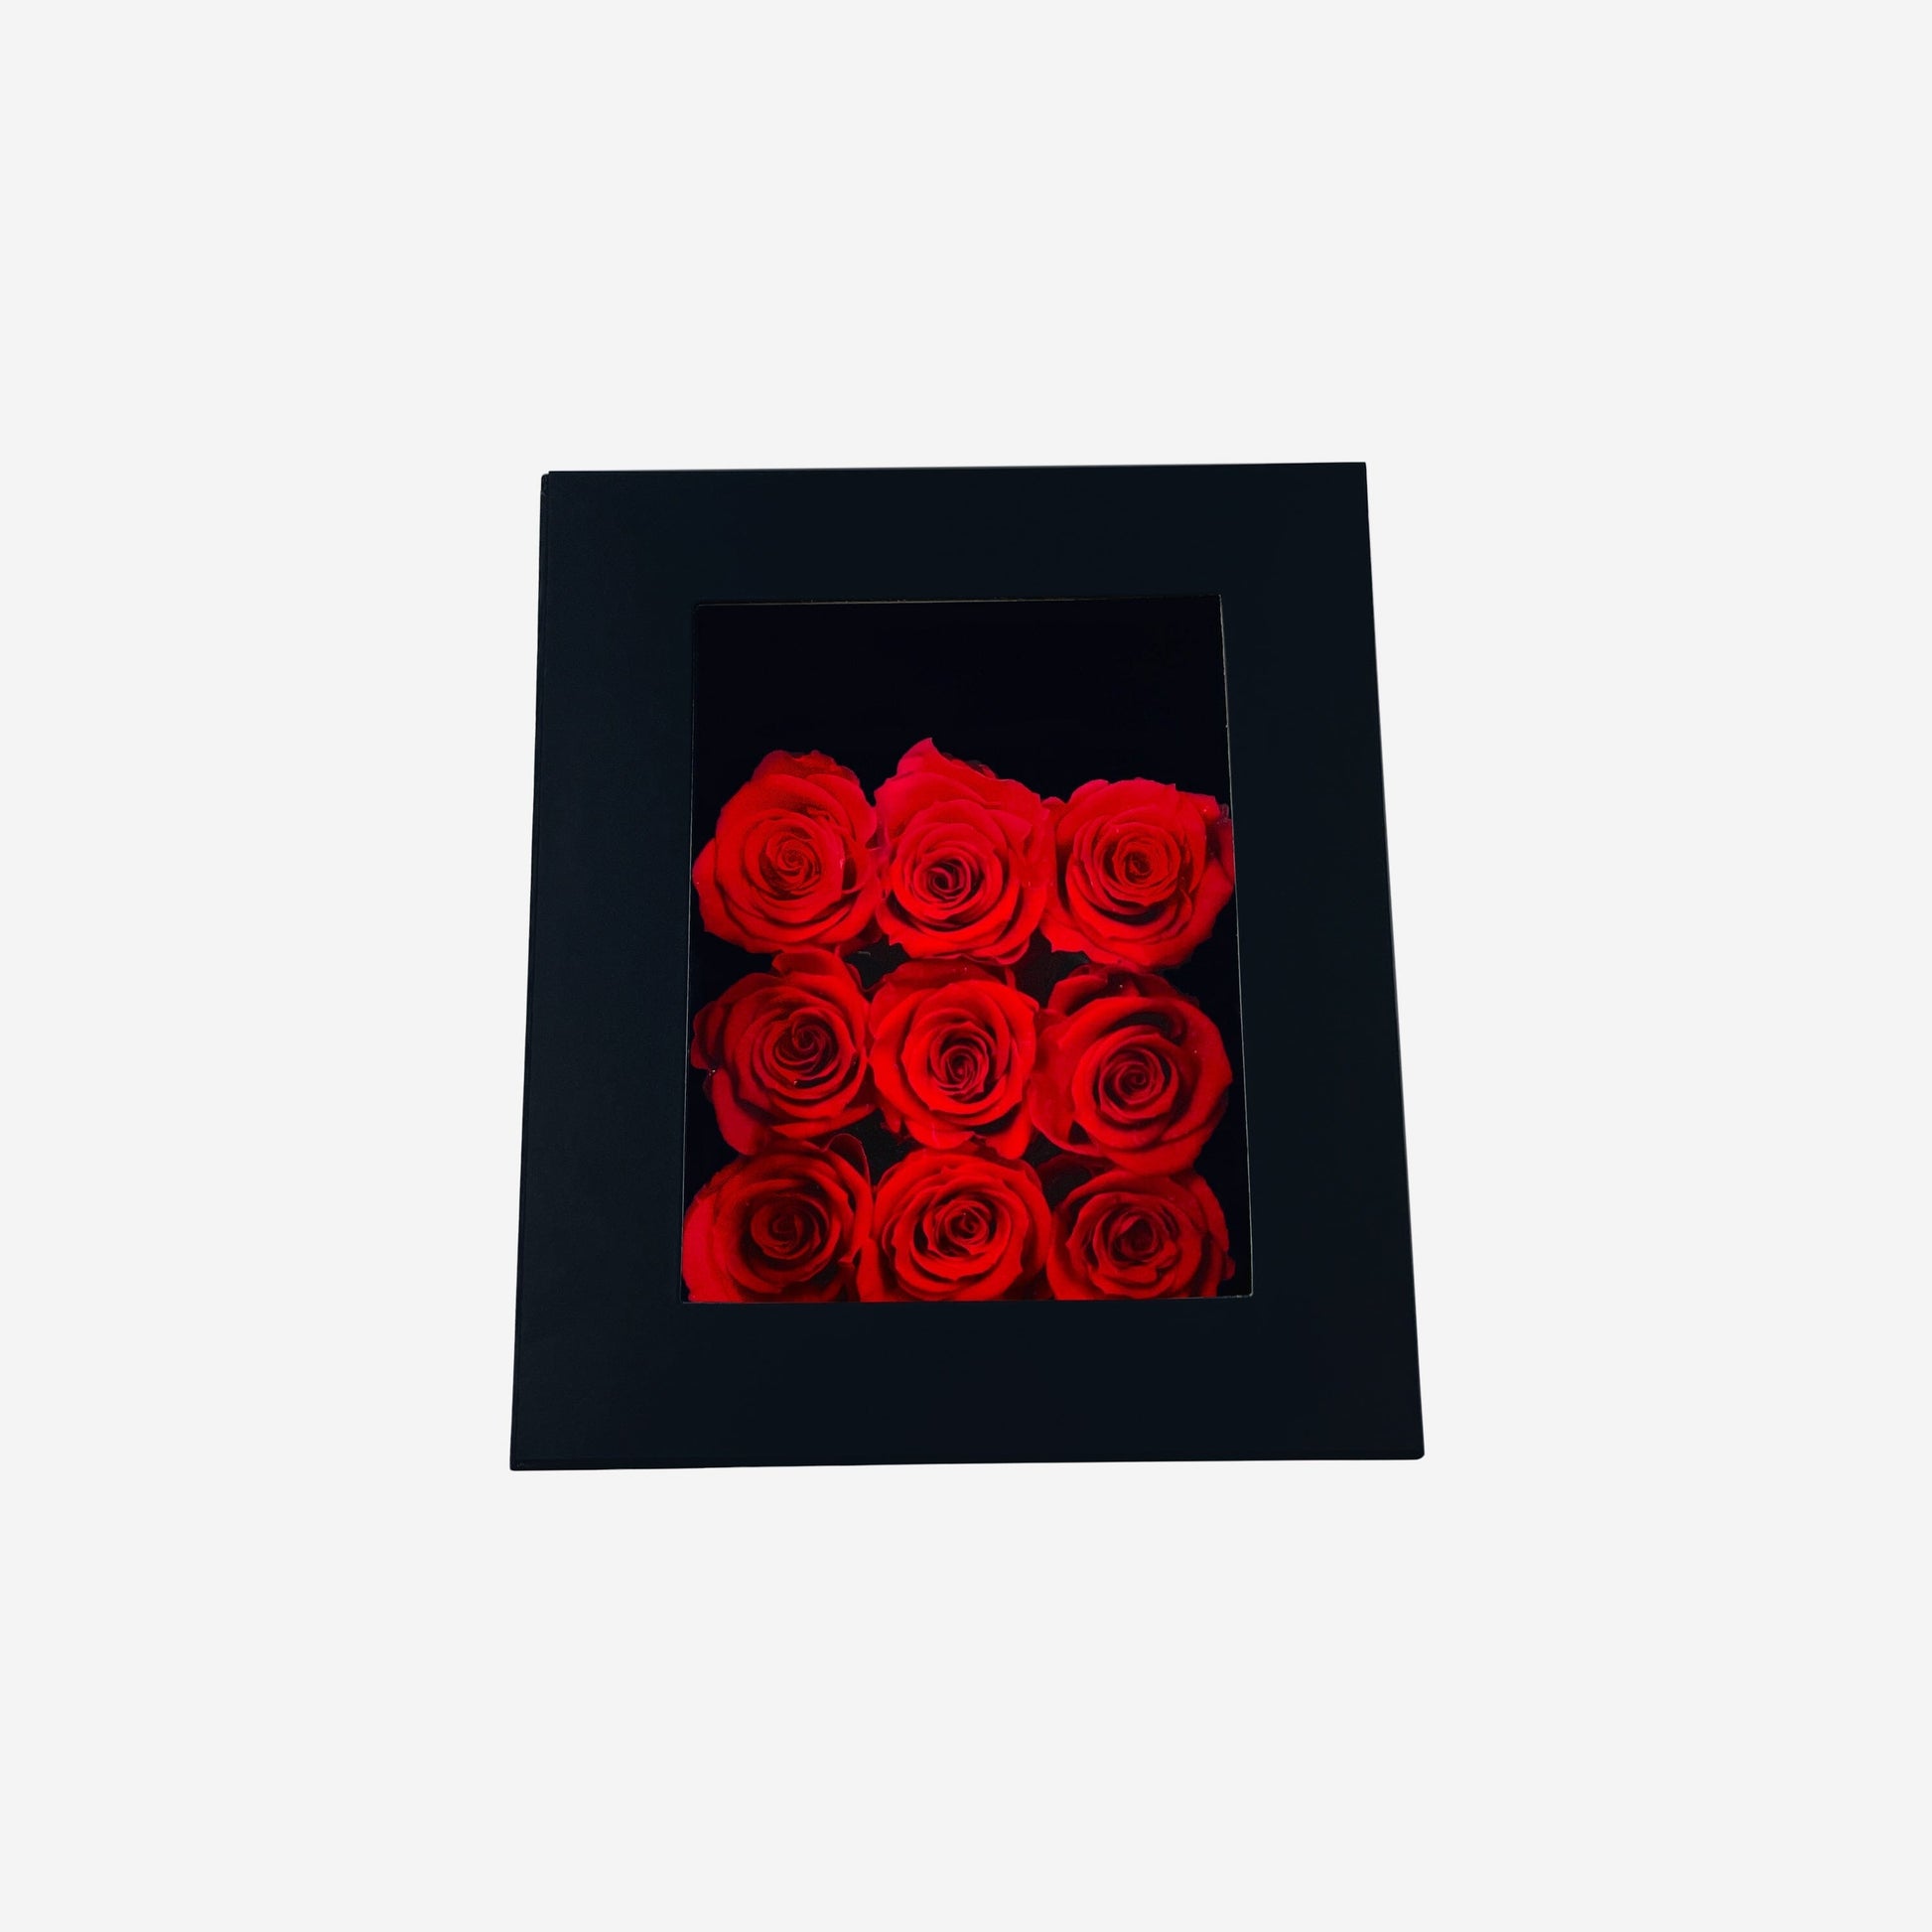 Trapezoid Black Box | Red Roses - The Million Roses